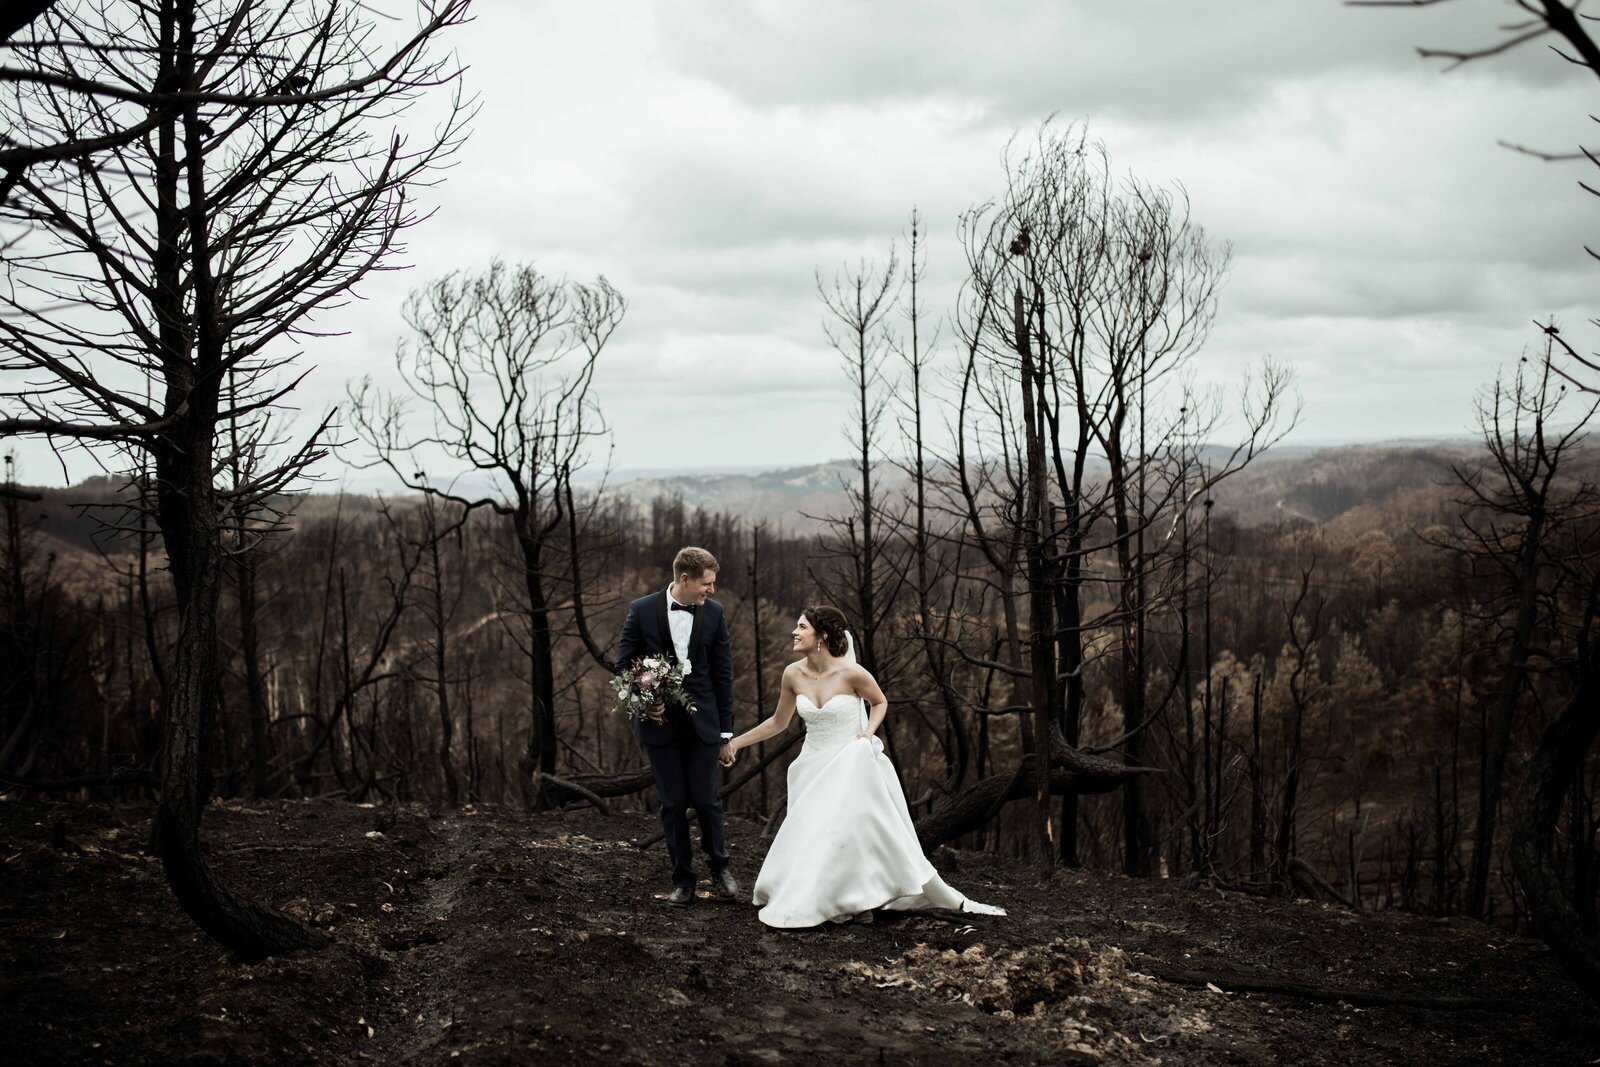 M&R-Anderson-Hill-Rexvil-Photography-Adelaide-Wedding-Photographer-576